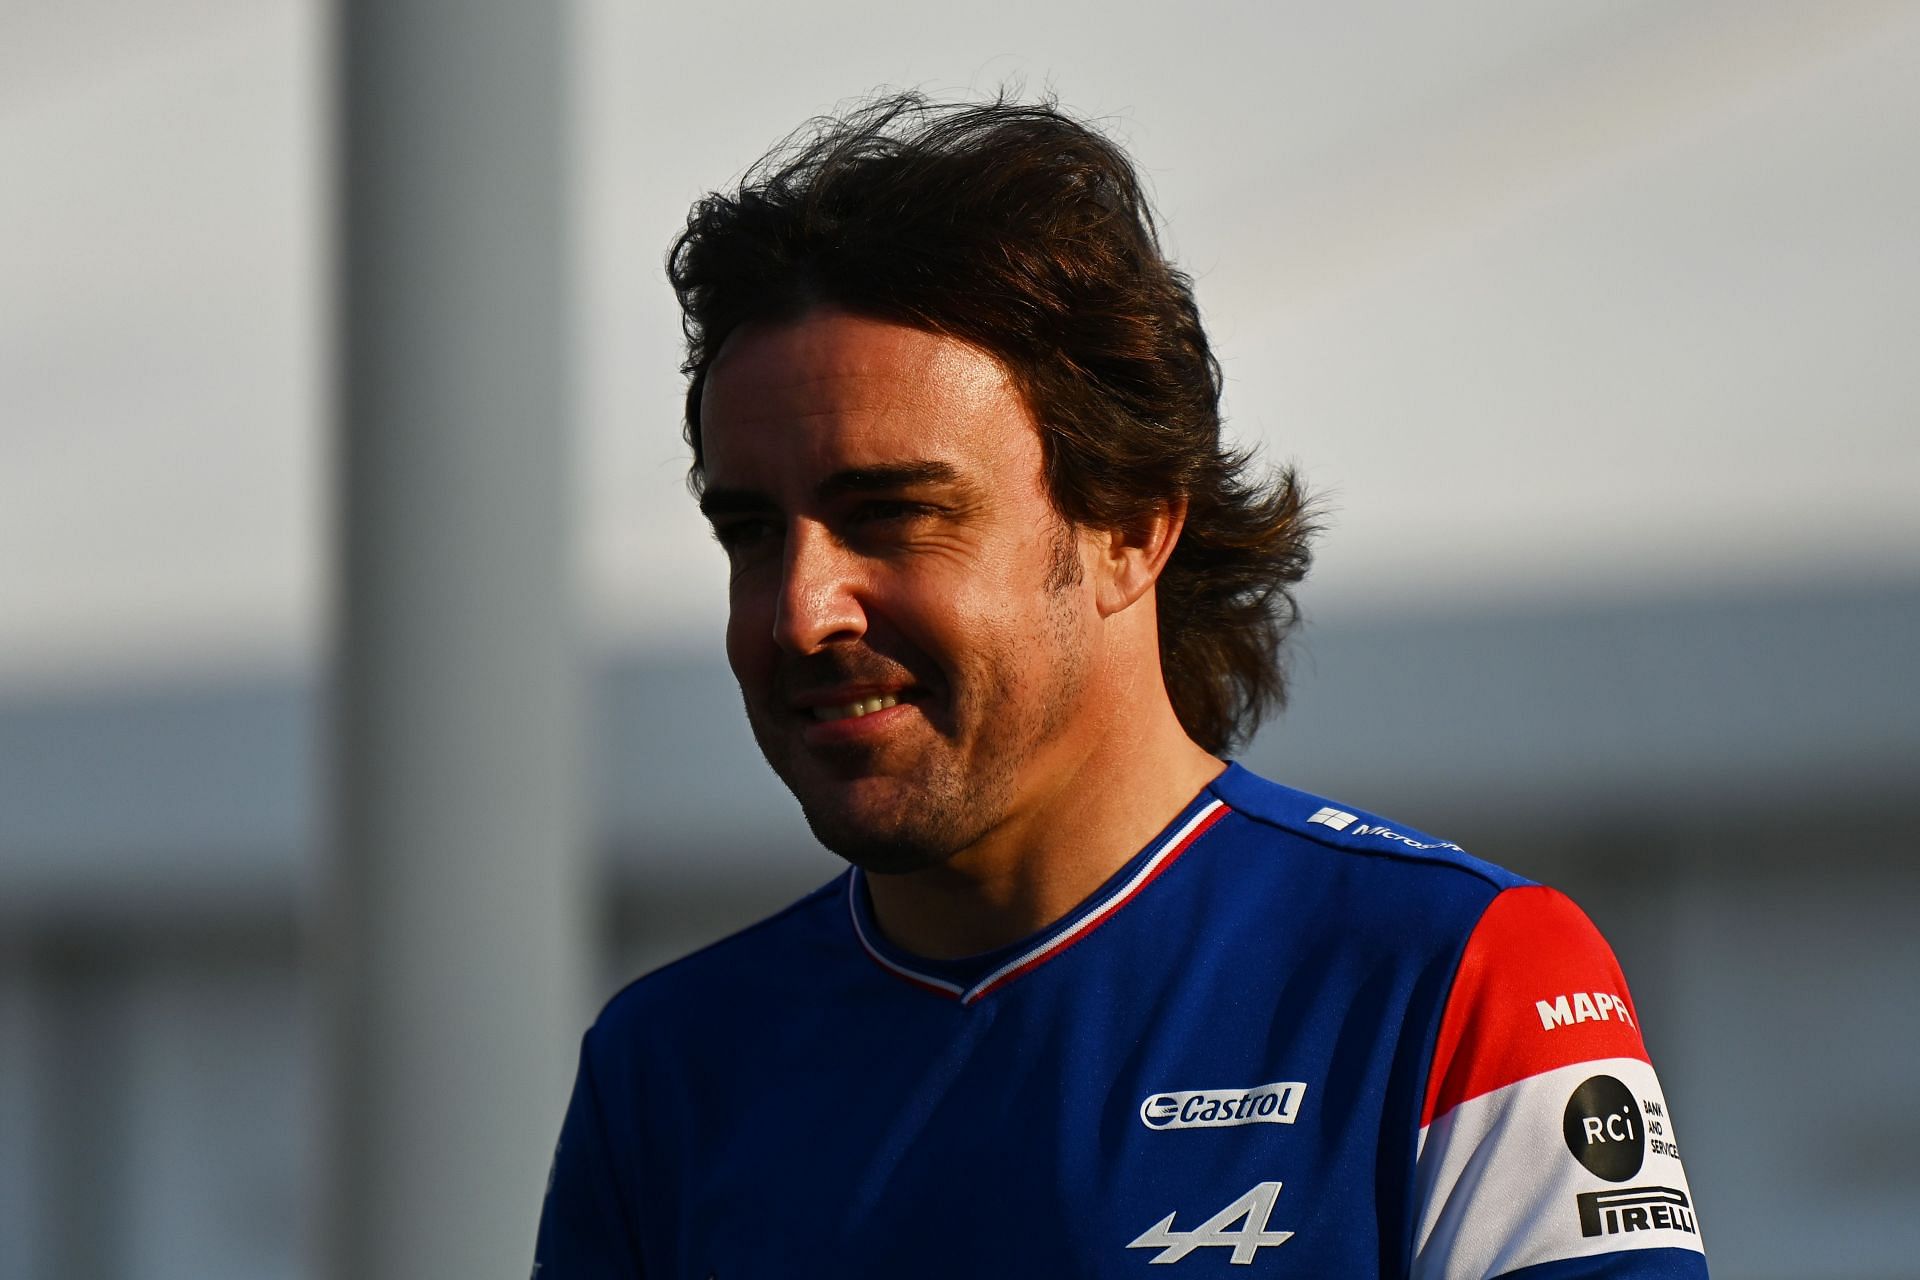 Fernando Alonso in the Paddock in Qatar. (Photo by Clive Mason/Getty Images)